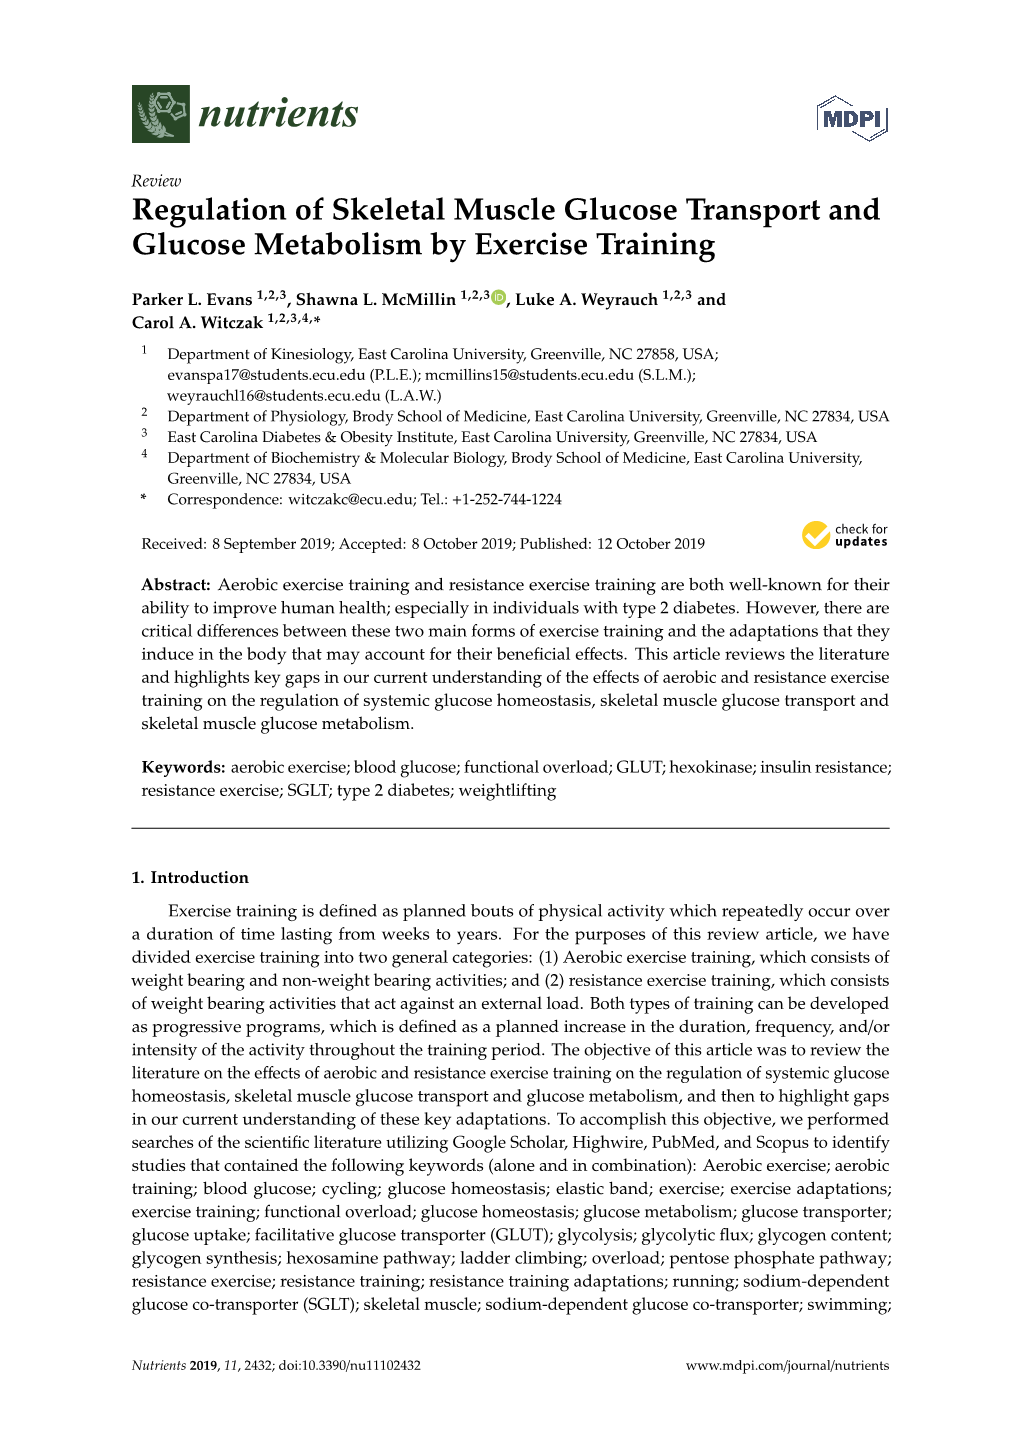 Regulation of Skeletal Muscle Glucose Transport and Glucose Metabolism by Exercise Training